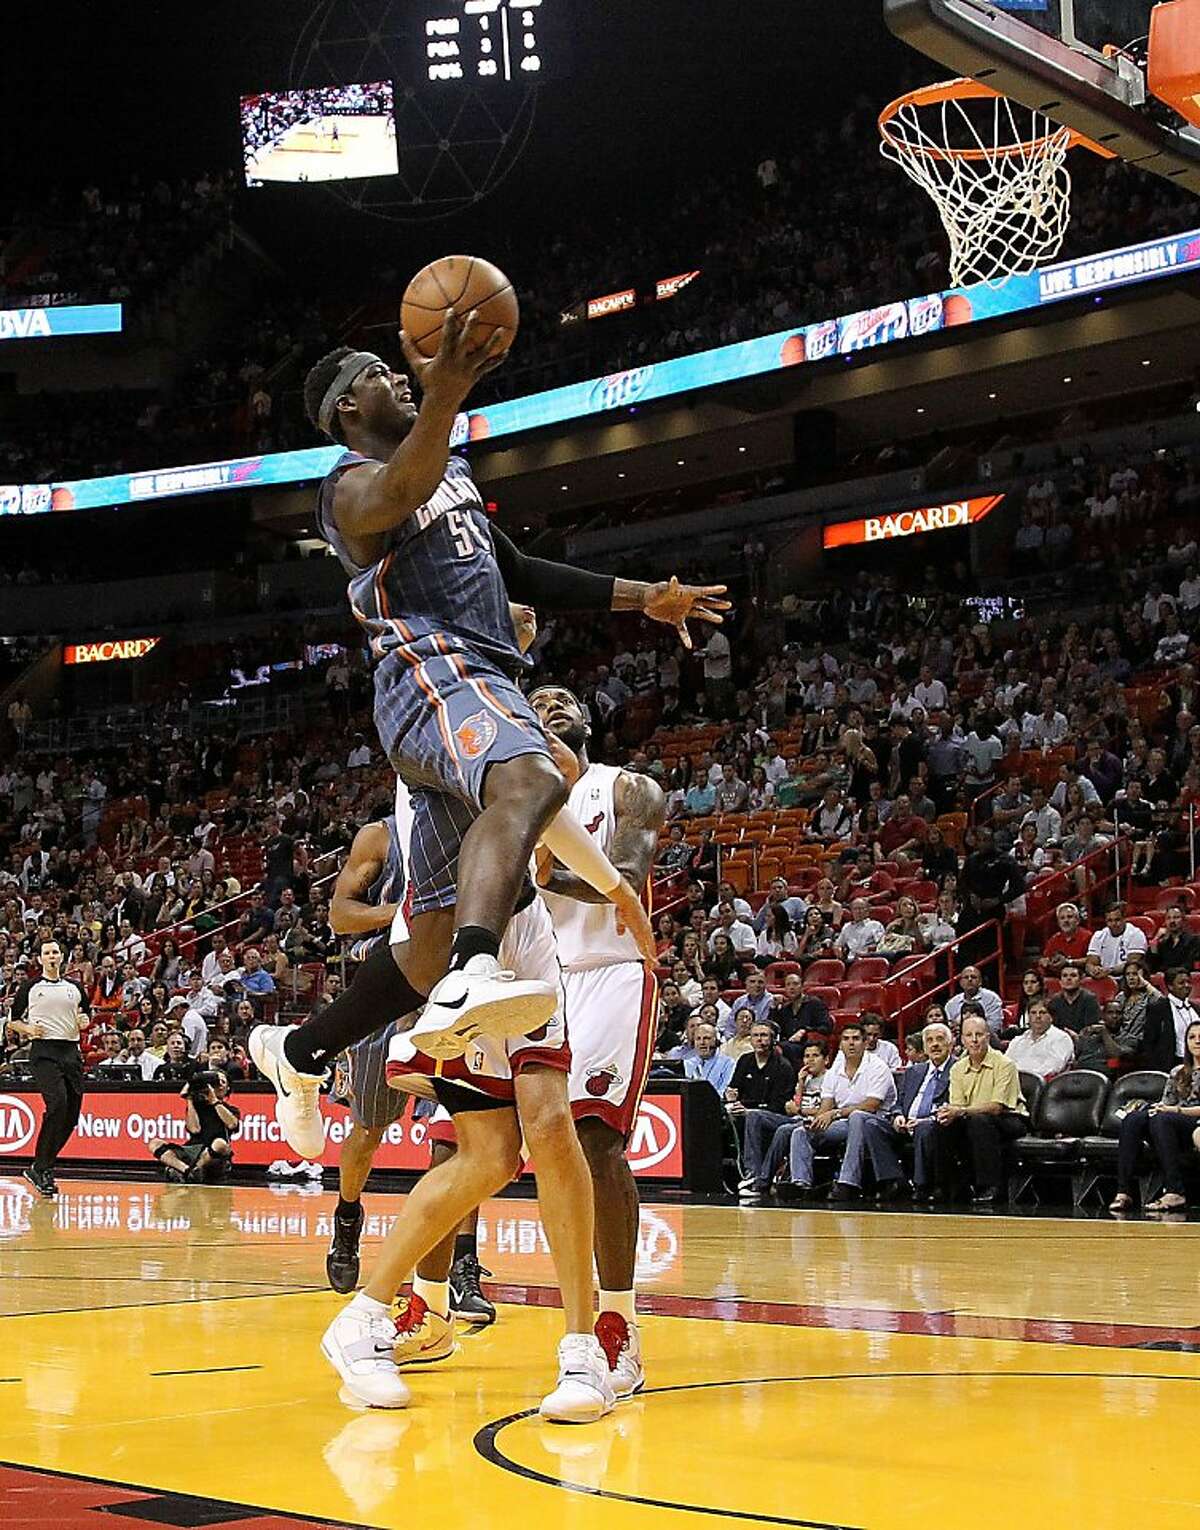 MIAMI, FL - APRIL 08: Kwame Brown #54 of the Charlotte Bobcats drives to the lane during a game against the Miami Heat at American Airlines Arena on April 8, 2011 in Miami, Florida. NOTE TO USER: User expressly acknowledges and agrees that, by downloading and/or using this Photograph, User is consenting to the terms and conditions of the Getty Images License Agreement. (Photo by Mike Ehrmann/Getty Images)